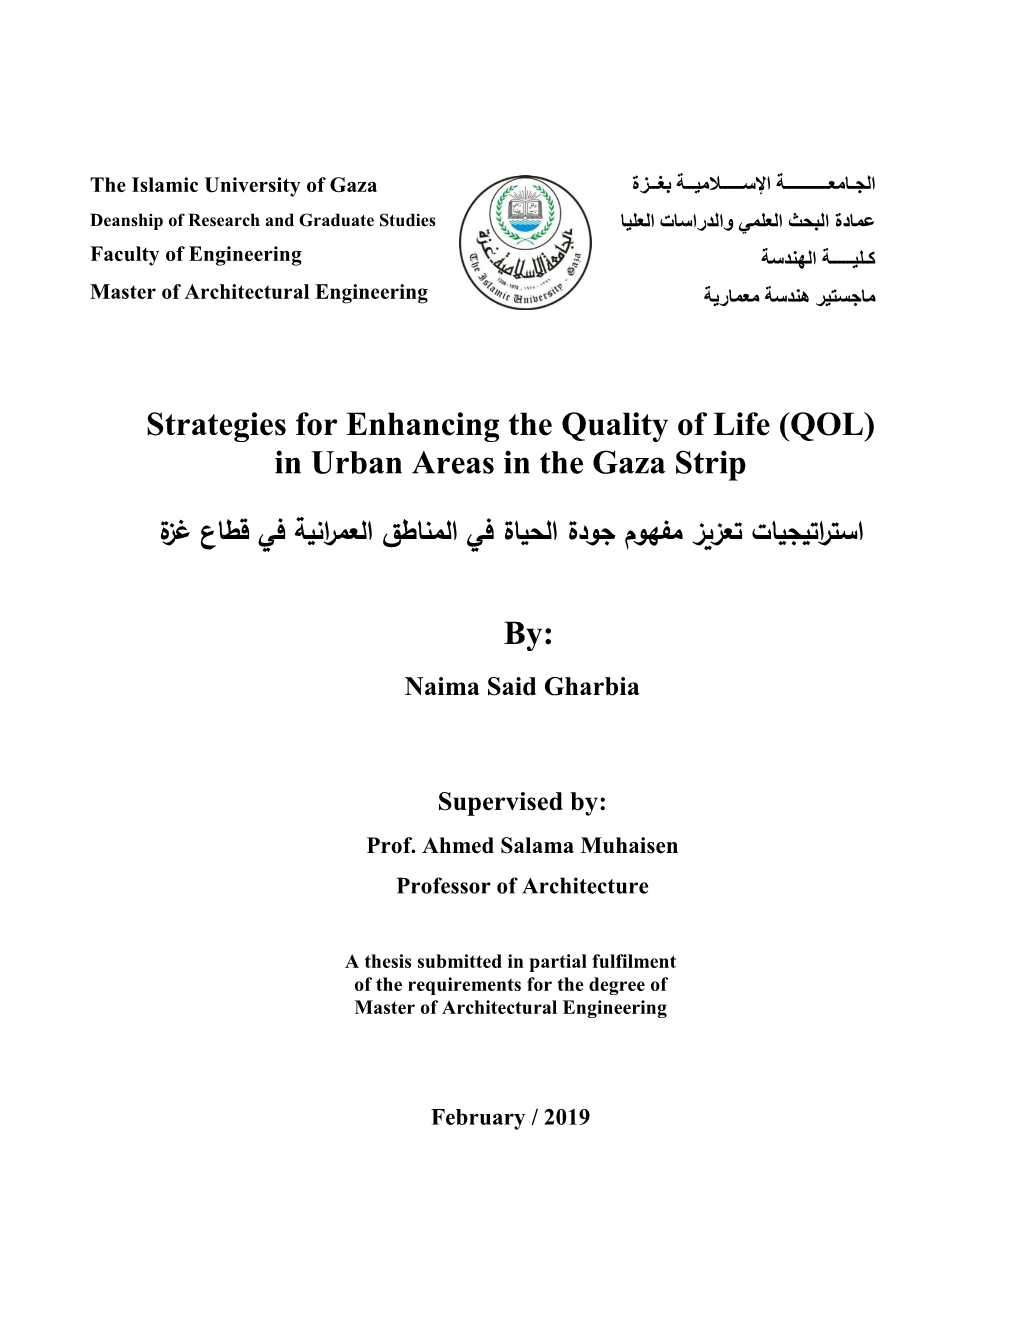 Strategies for Enhancing the Quality of Life (QOL) in Urban Areas in the Gaza Strip